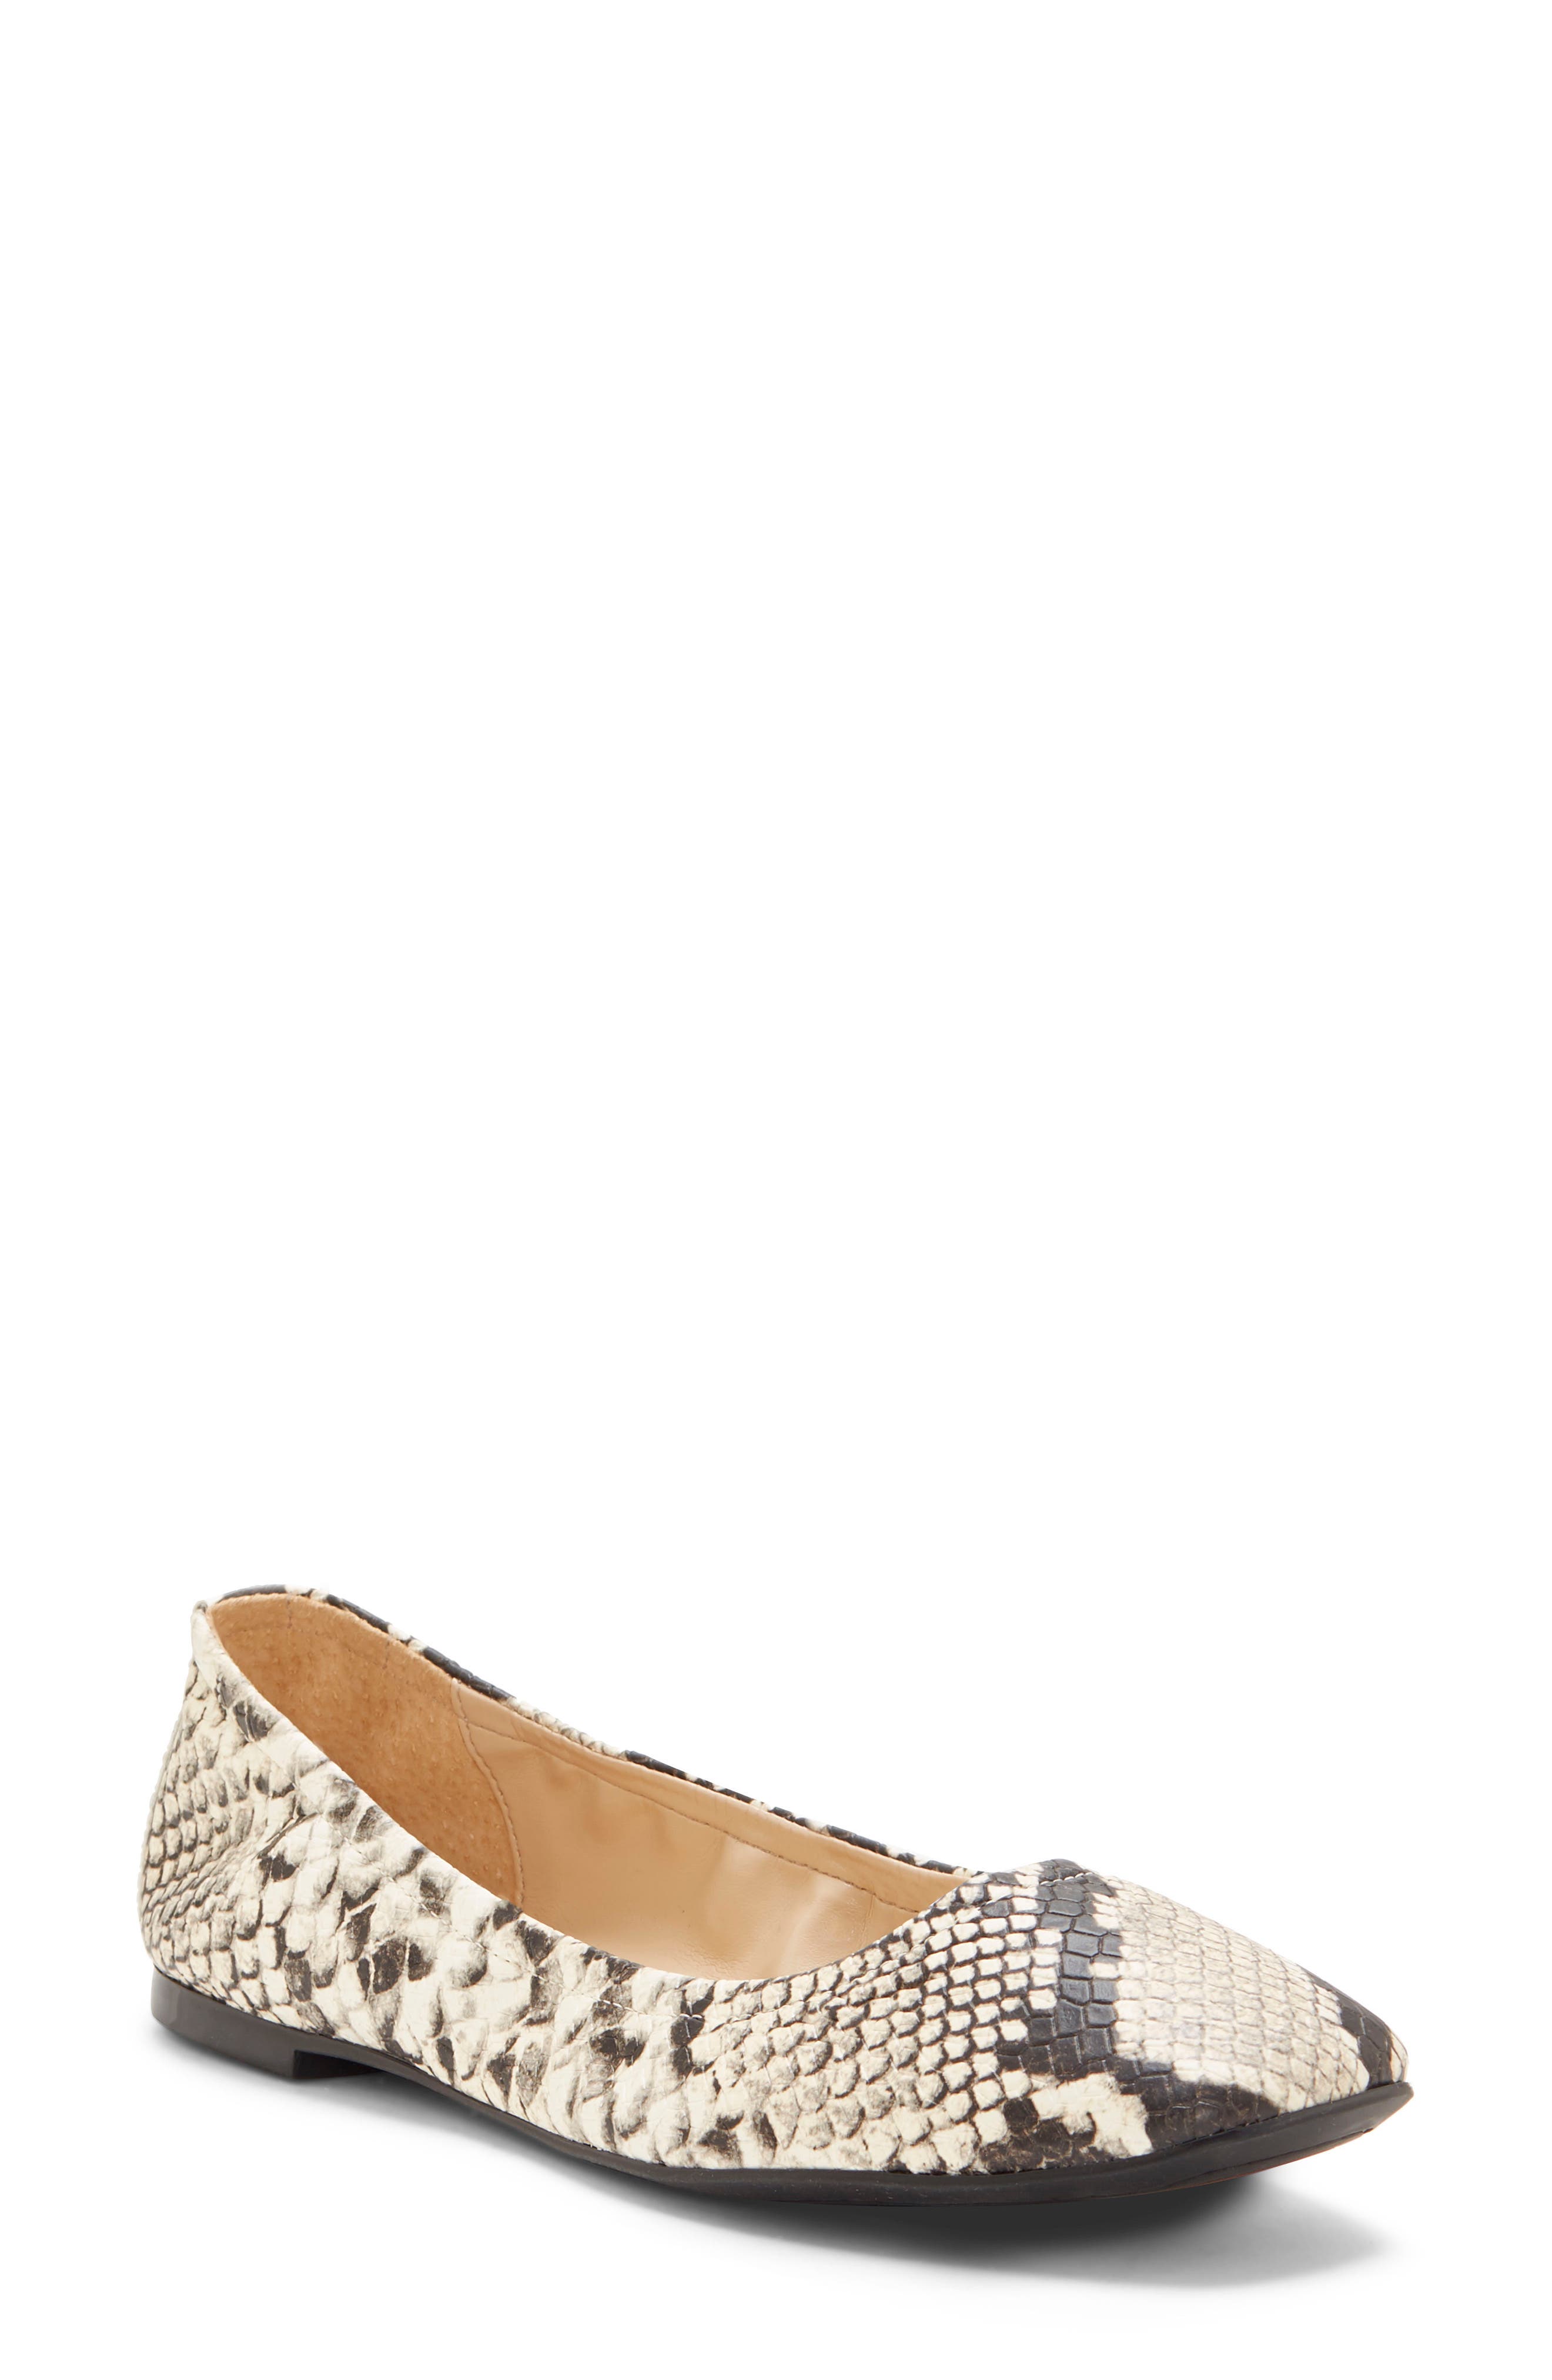 vince camuto leather flats